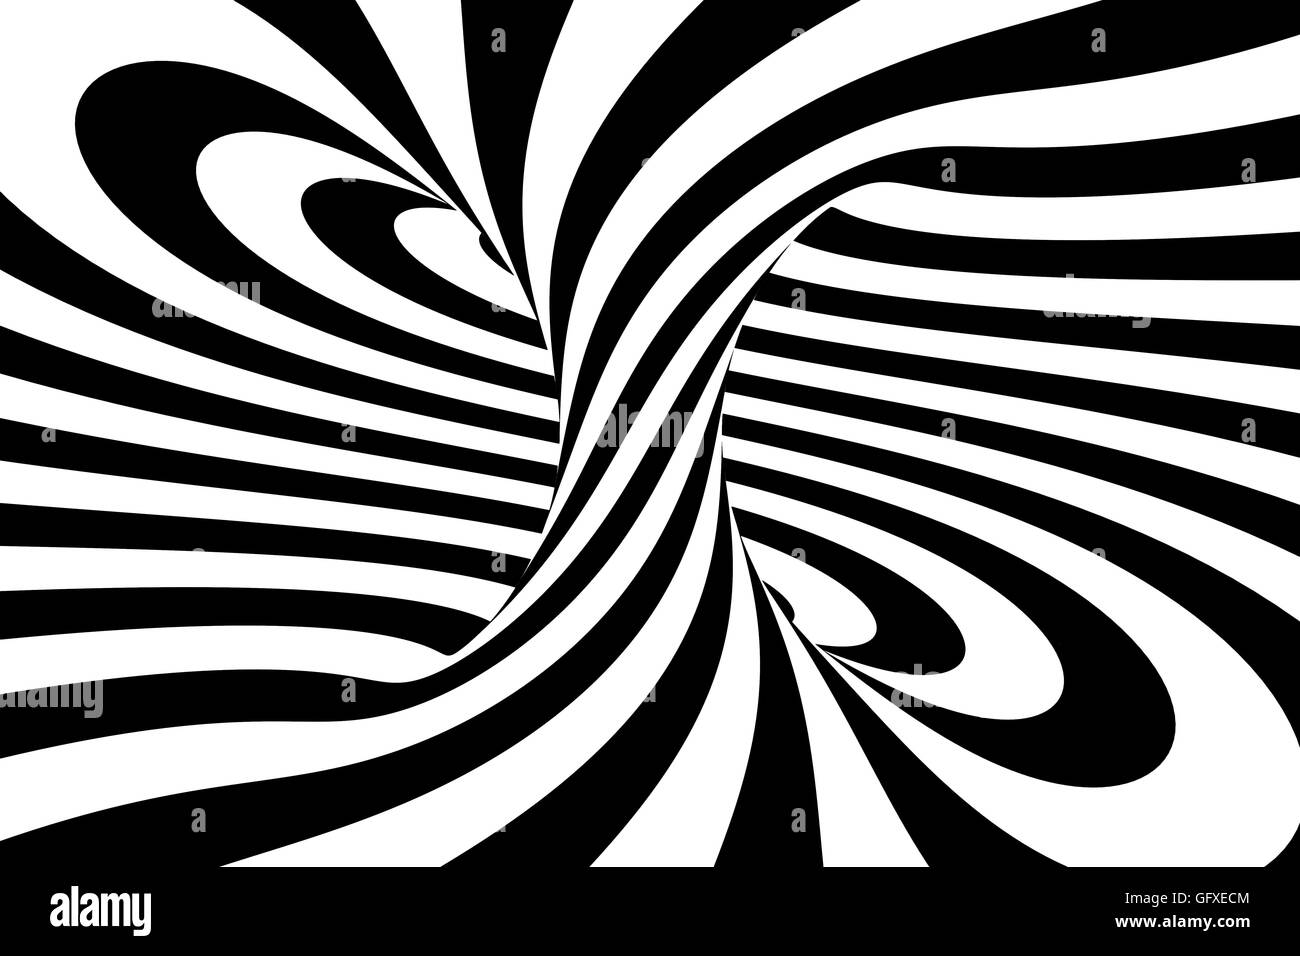 Black and white abstract spiral background, 3D rendering Stock Photo